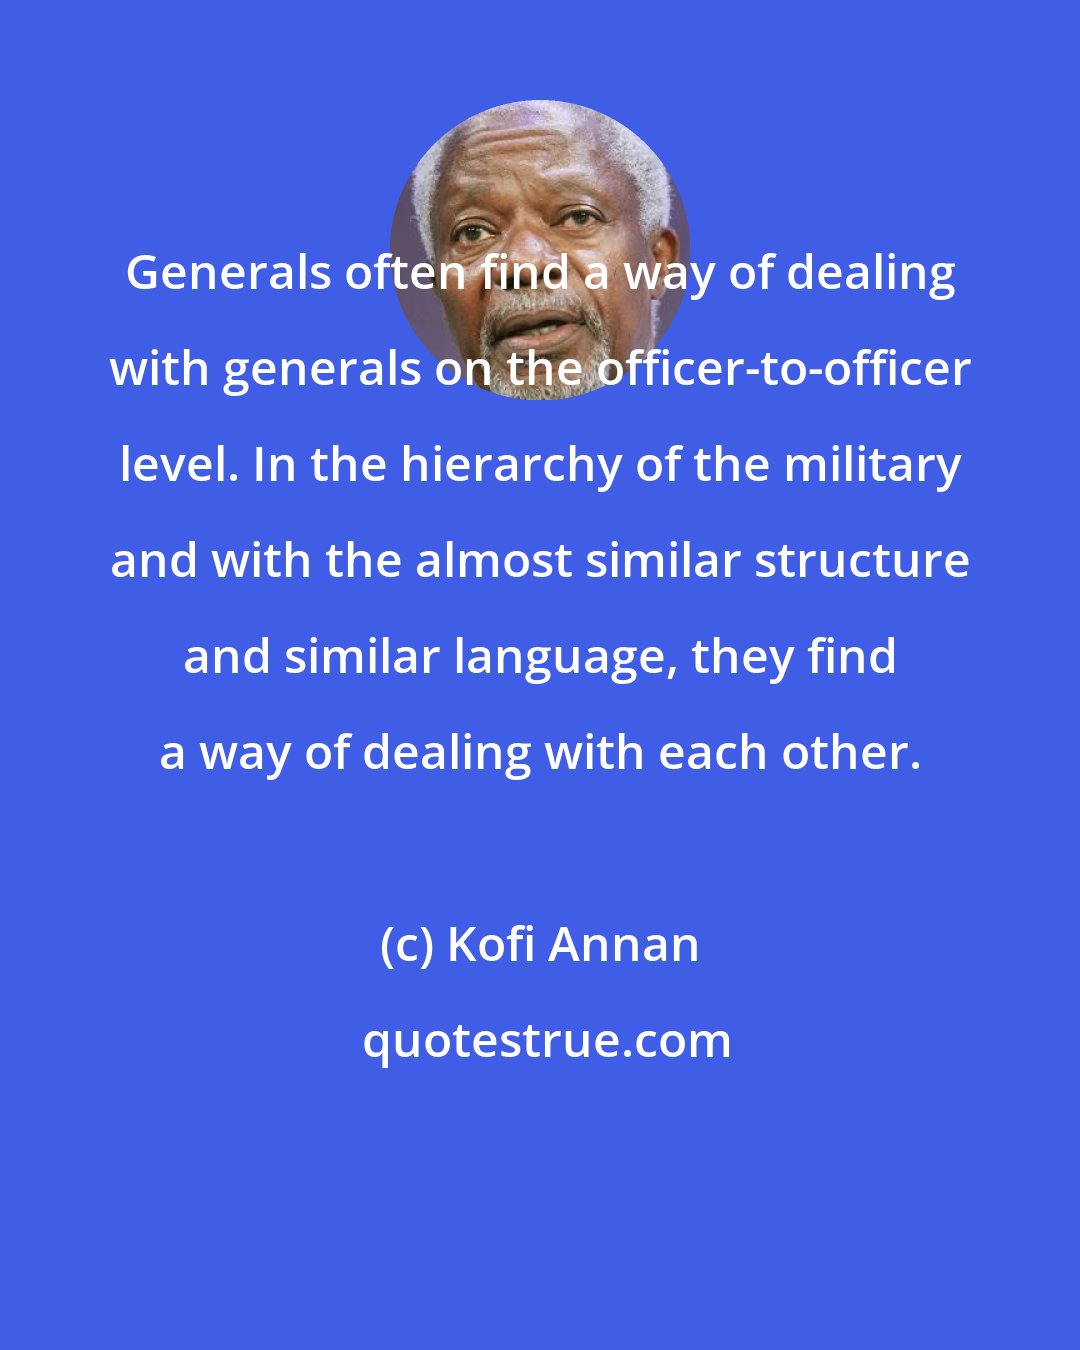 Kofi Annan: Generals often find a way of dealing with generals on the officer-to-officer level. In the hierarchy of the military and with the almost similar structure and similar language, they find a way of dealing with each other.